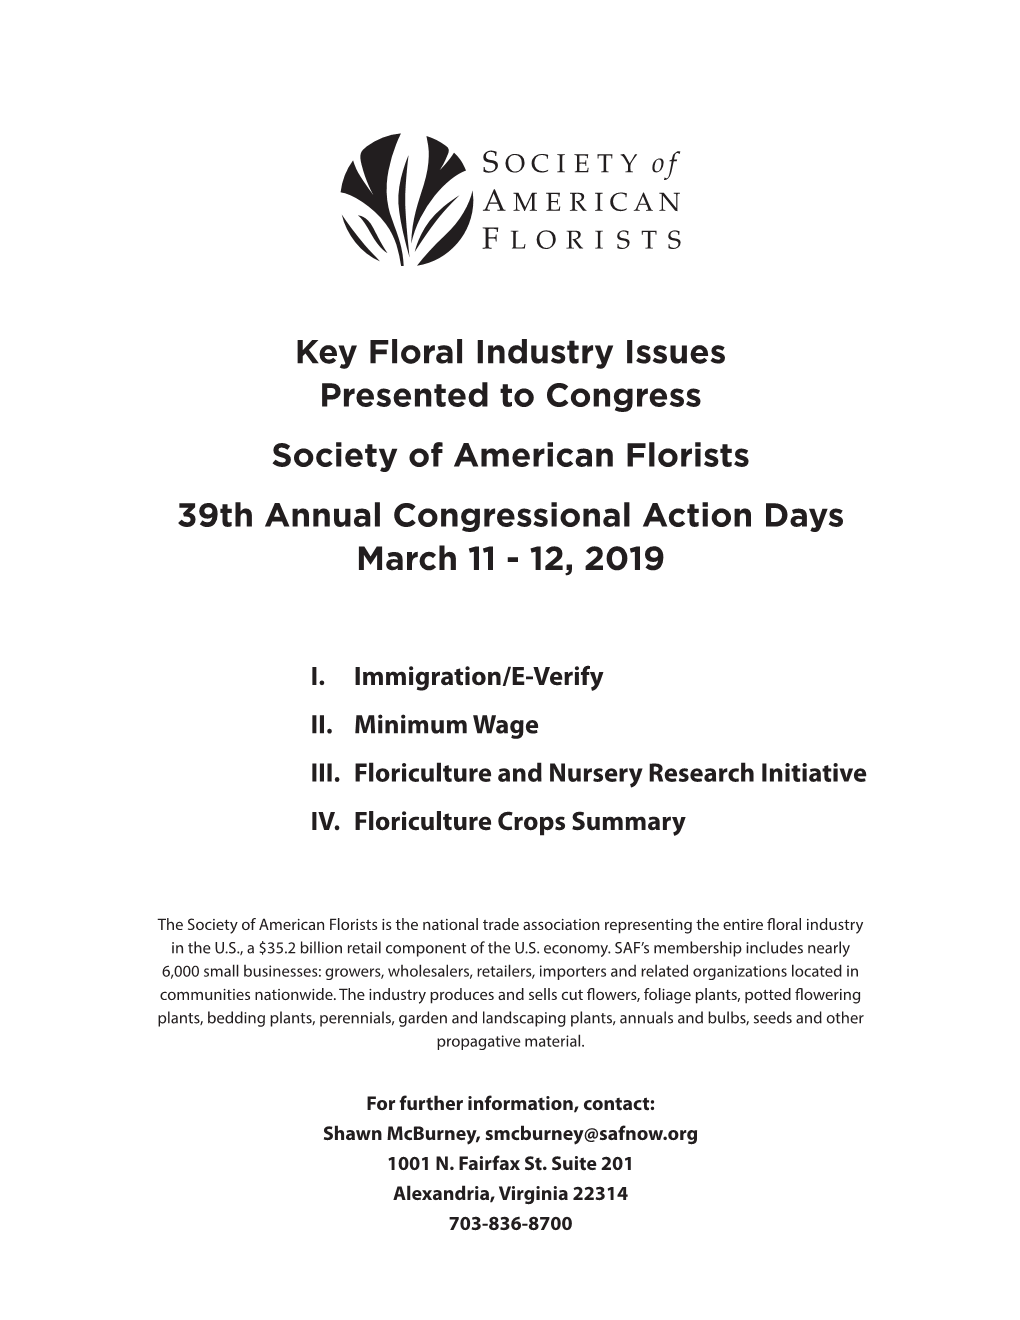 Key Floral Industry Issues Presented to Congress Society of American Florists 39Th Annual Congressional Action Days March 11 - 12, 2019